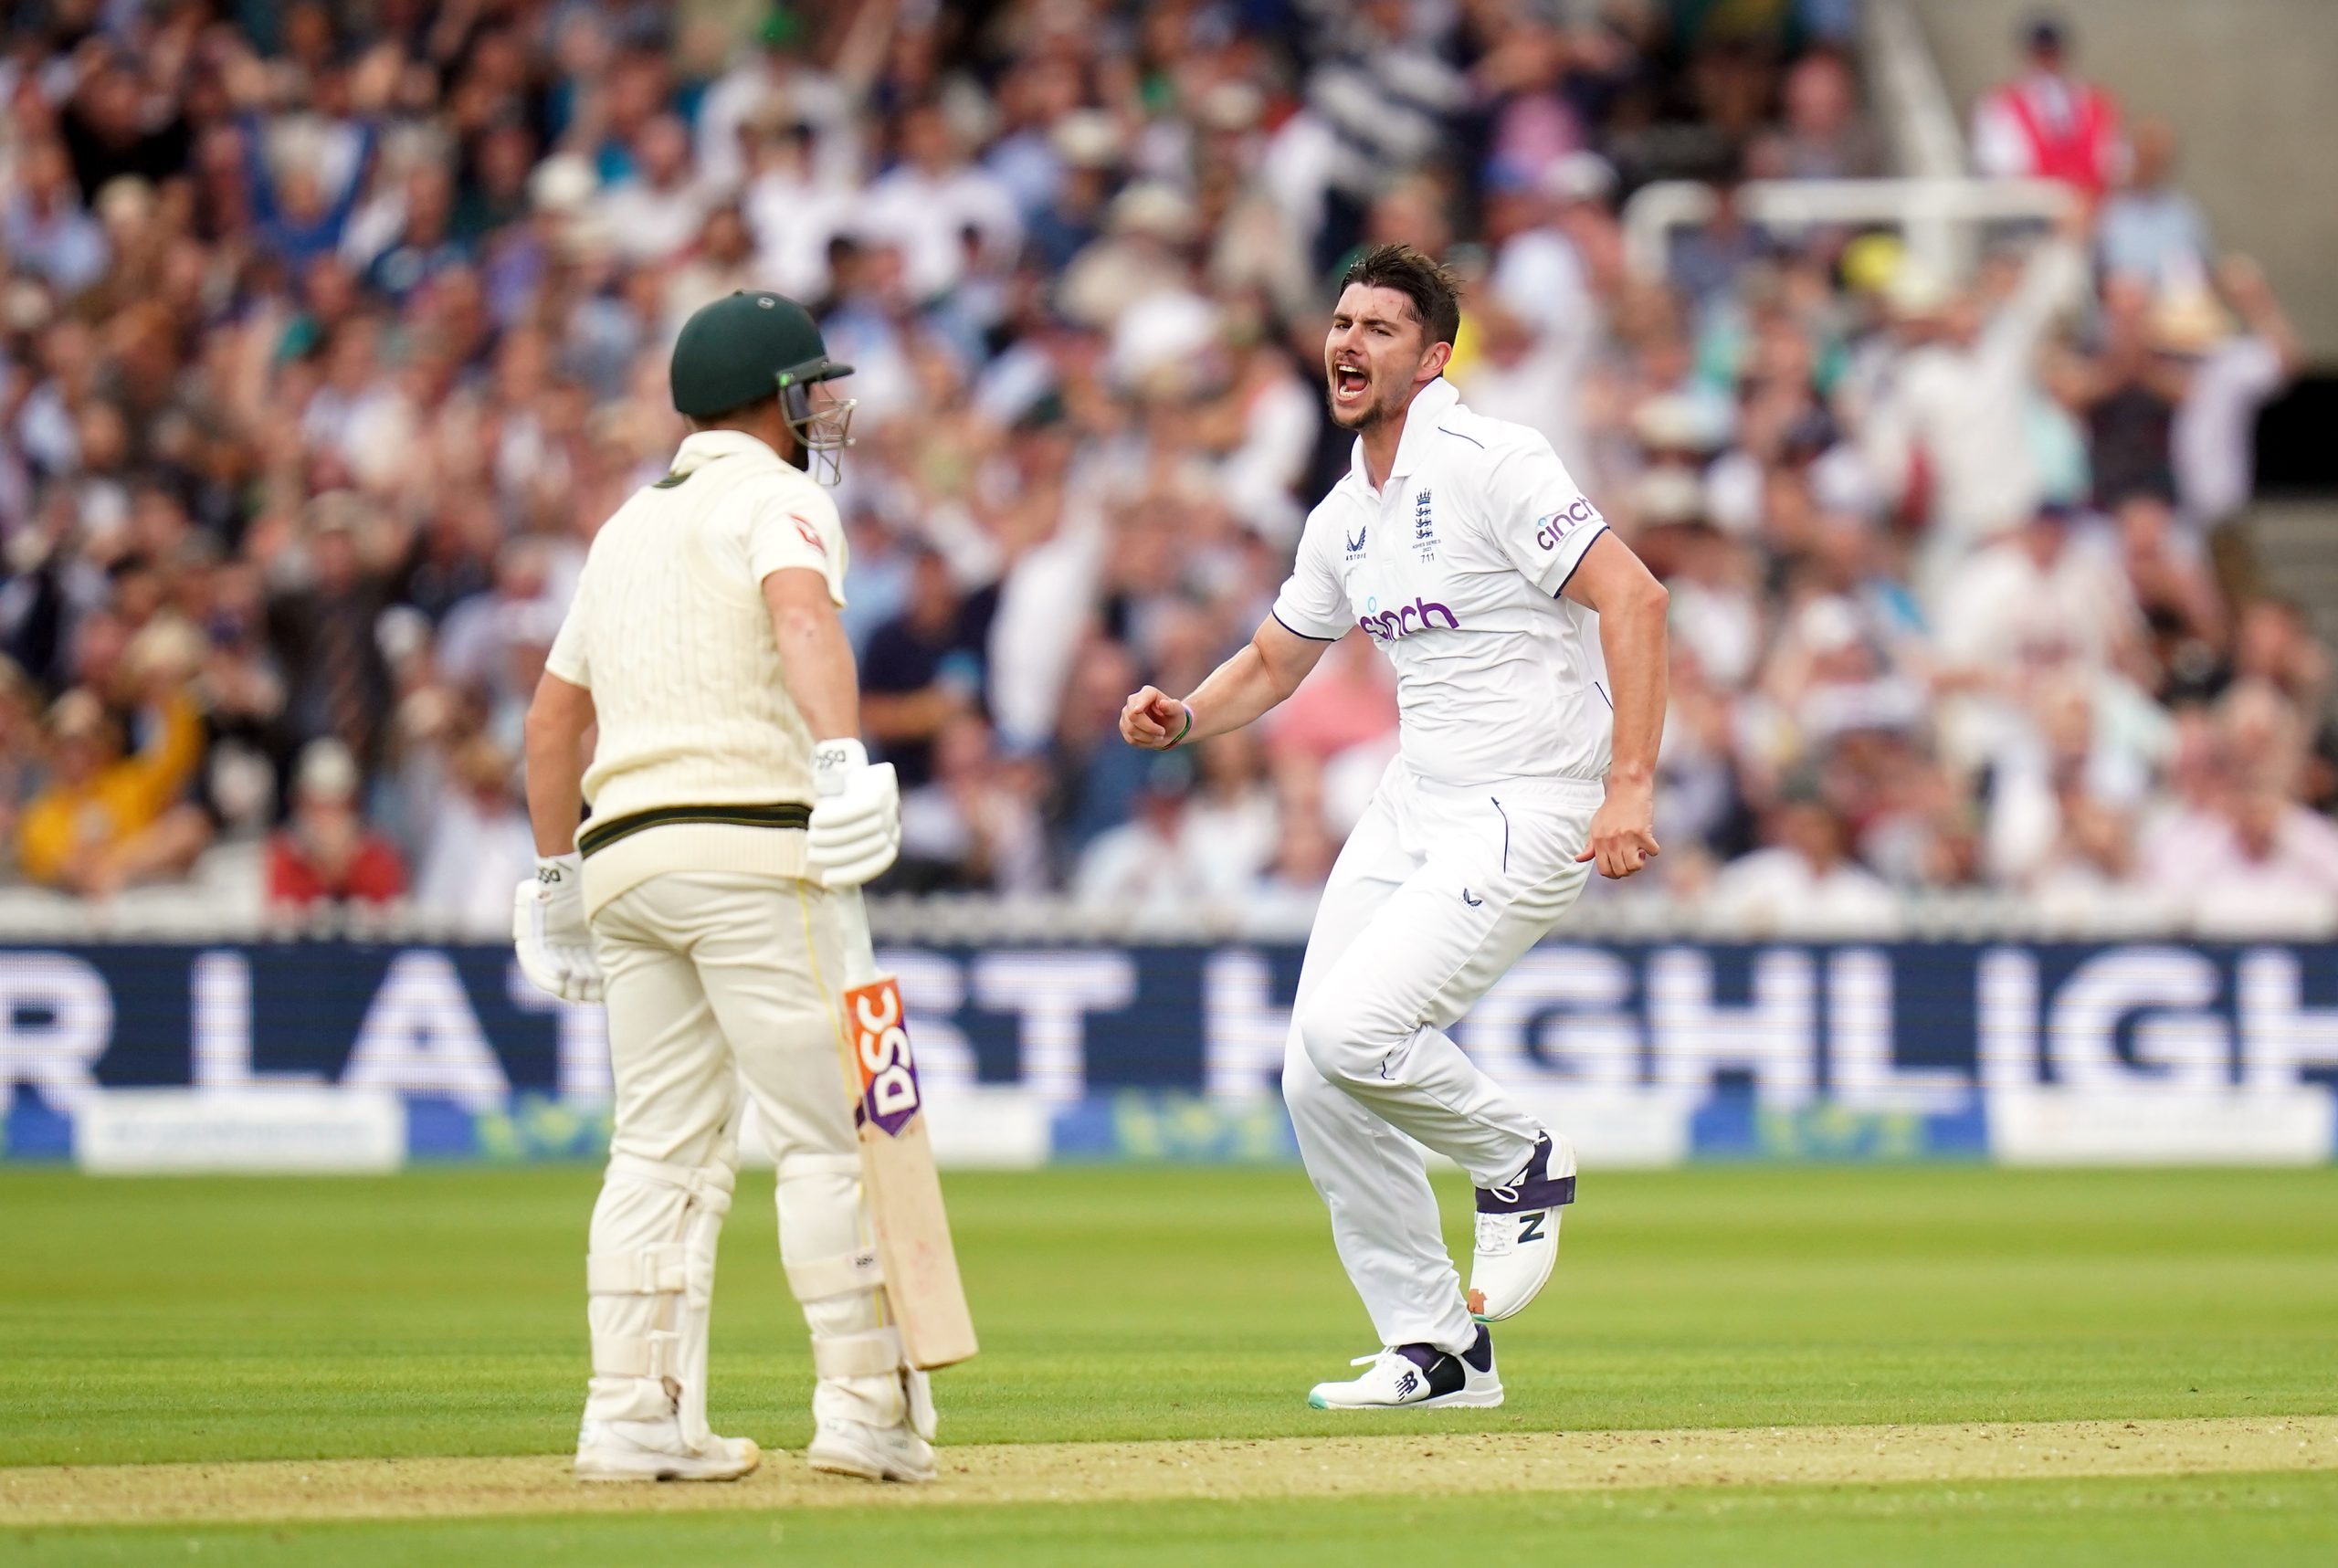 Josh Tongue enjoys taste of Ashes but Australia in control at Lord’s